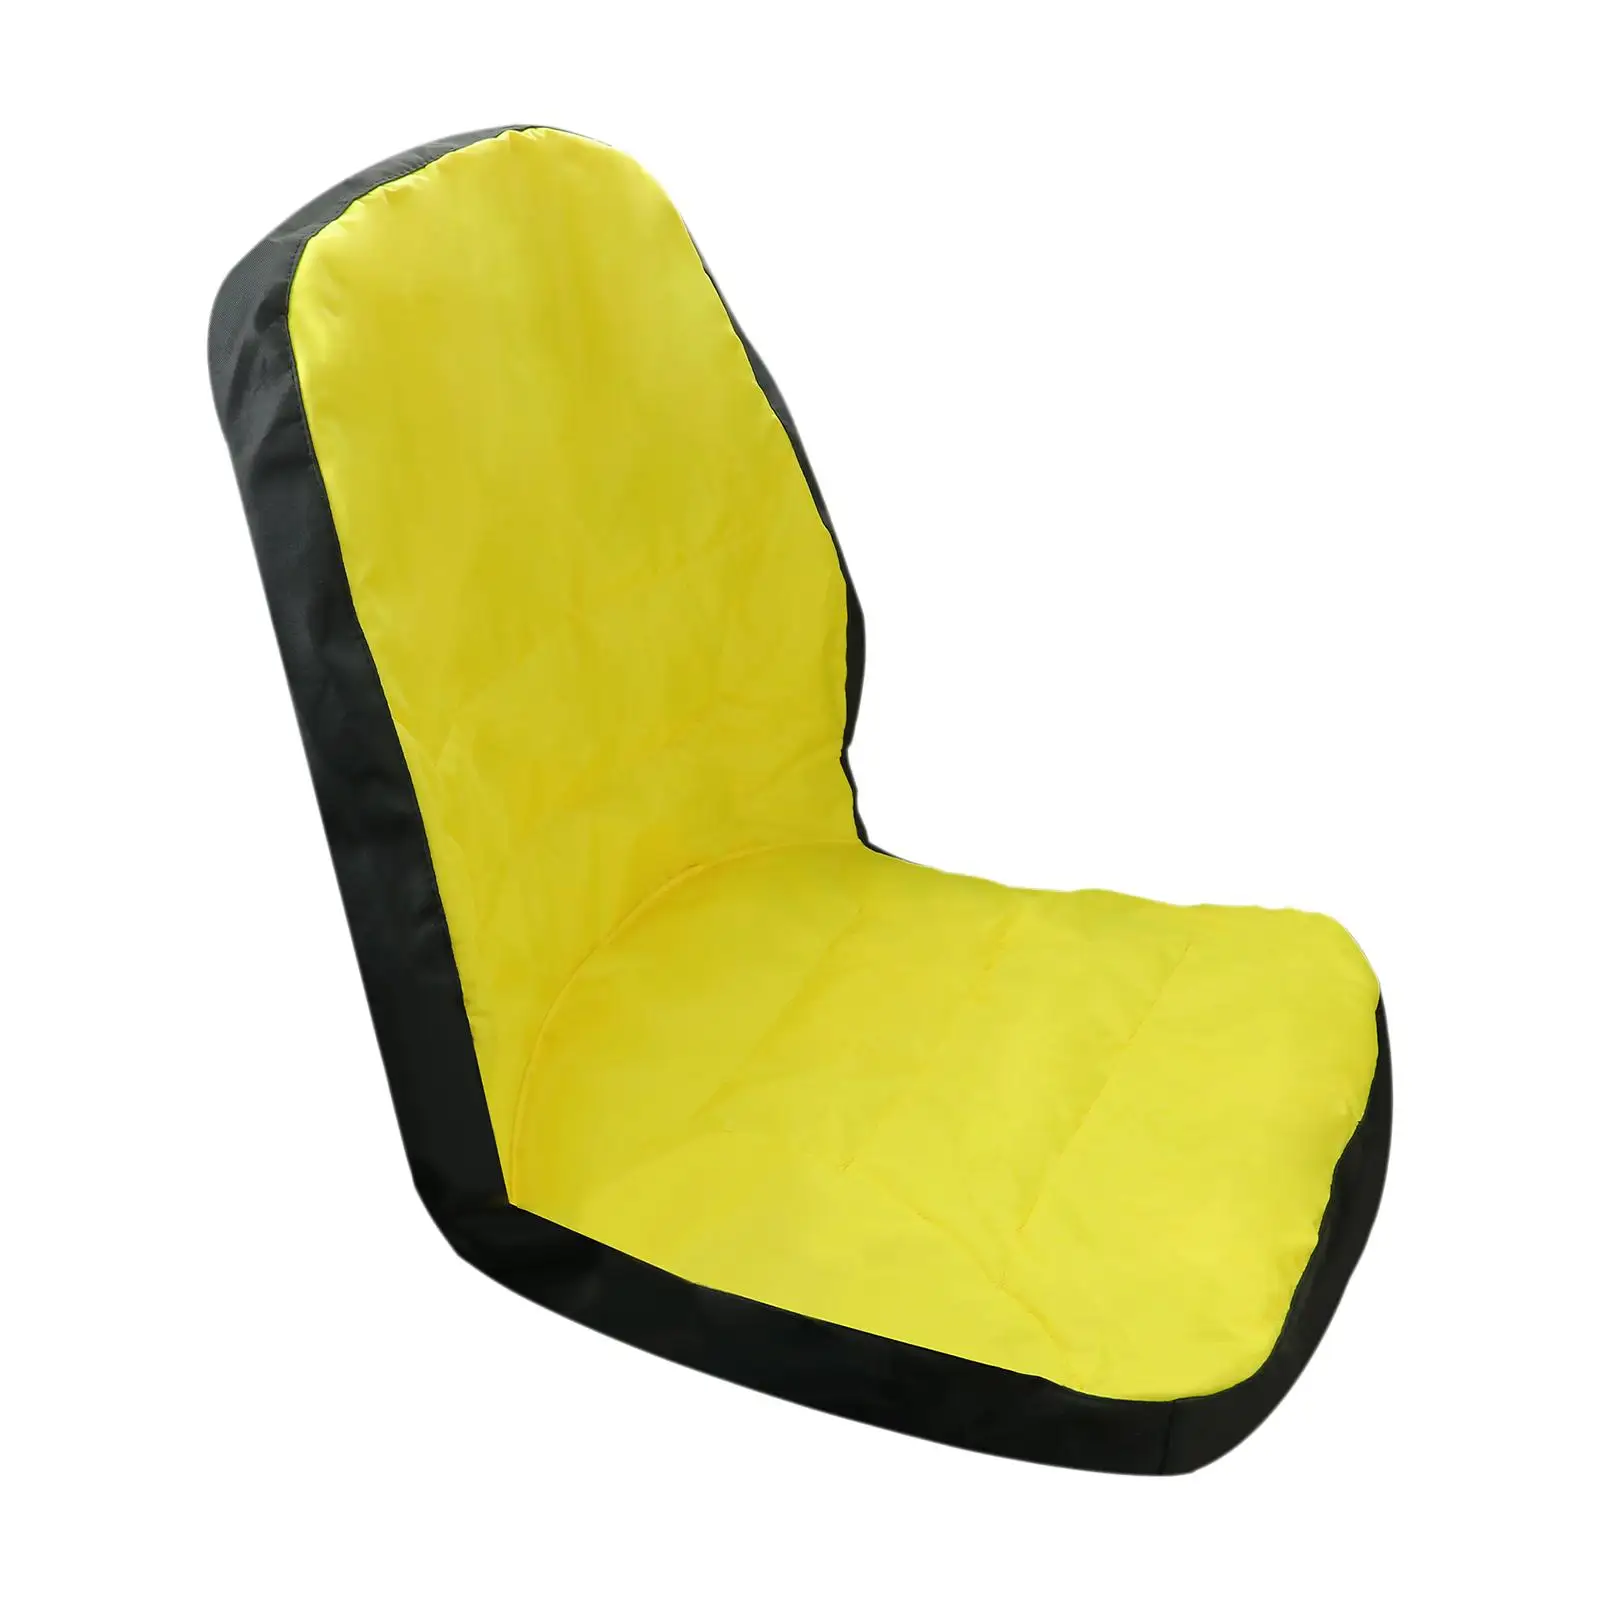 Compact Utility Tractor Seat Cover LP95233 Waterproof Comfortable 18inch Cushioned Seat for 1023E 3R Series 2305 2720 2520